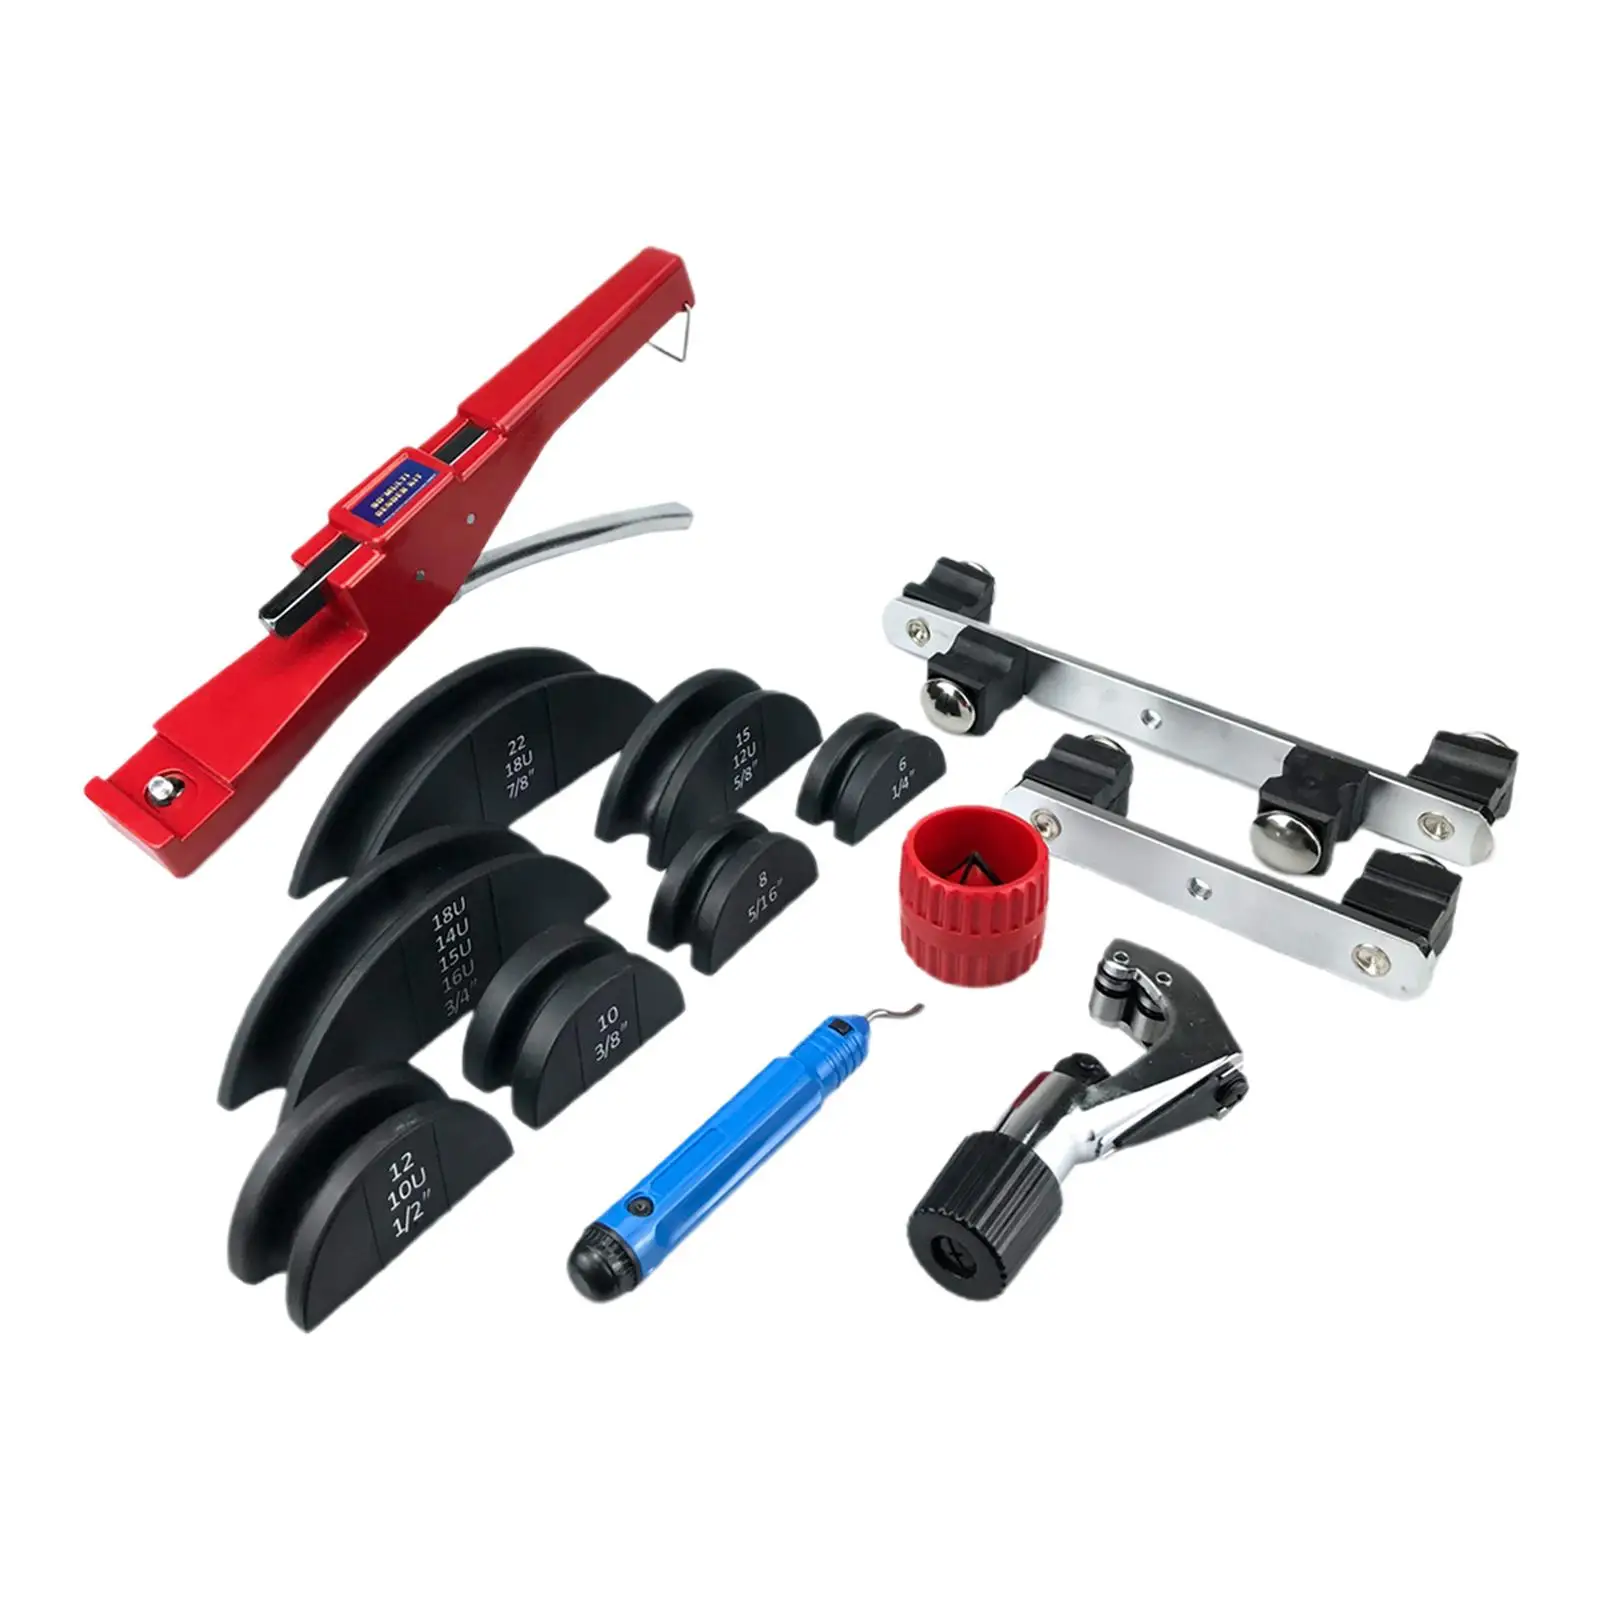 90 Degrees Pipe Bender Kits Manual Repair Tools for Thin Walled Iron Pipe